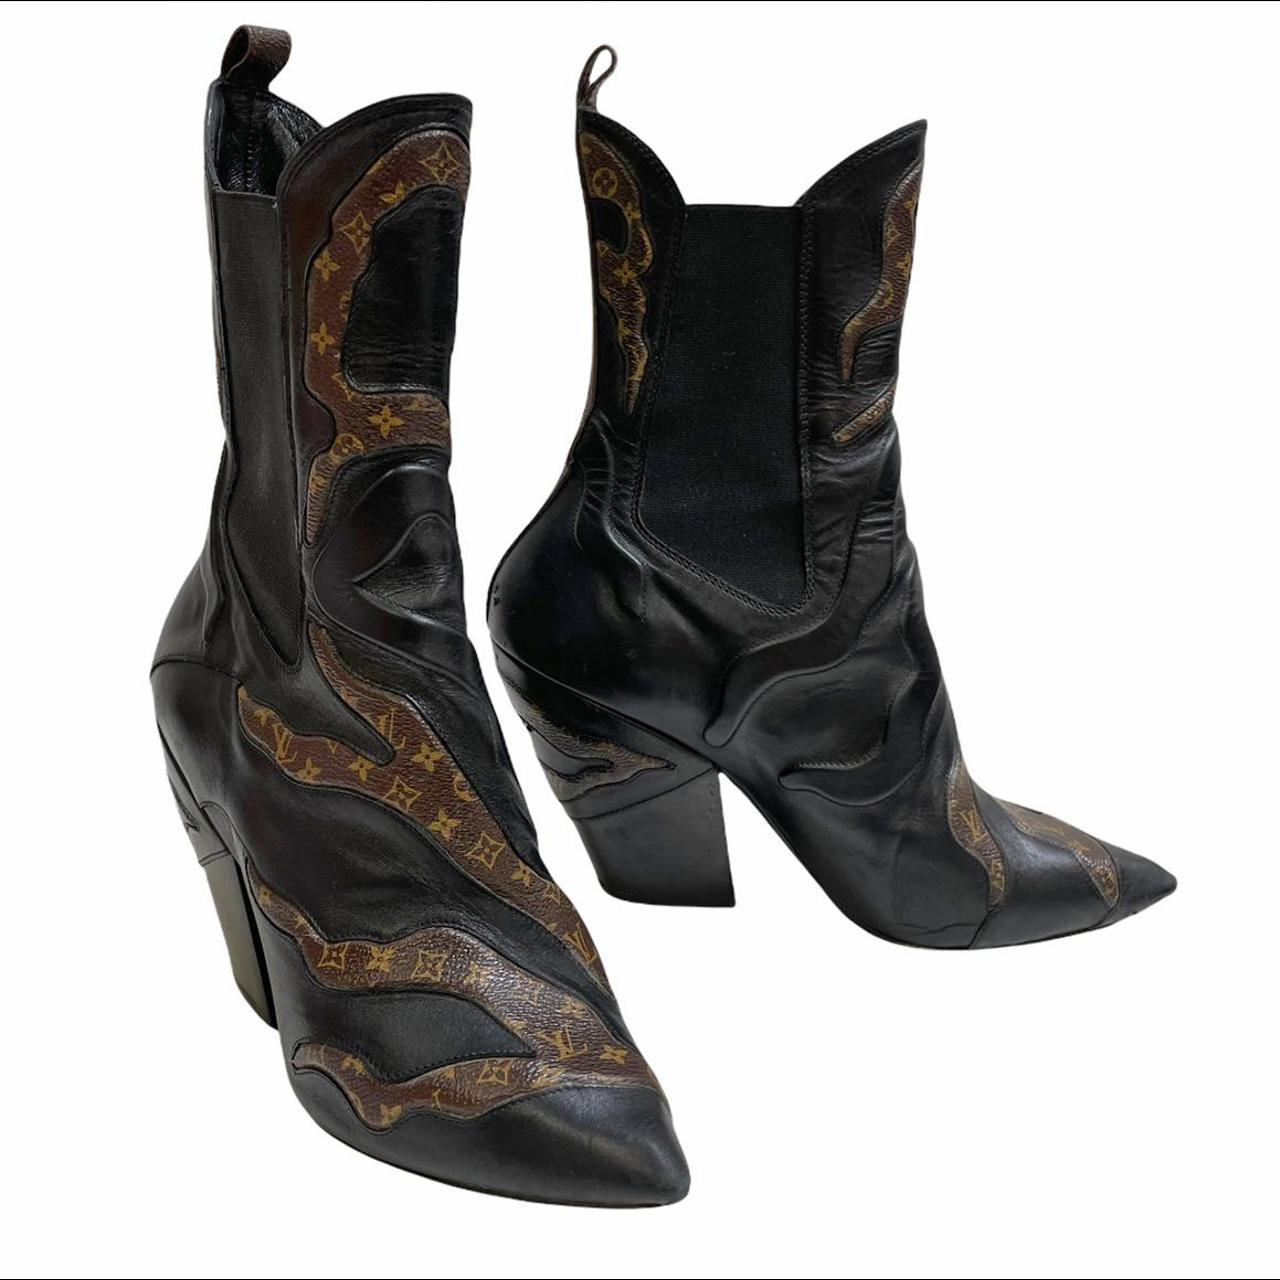 Louis Vuitton Fireball Leather Monogram Ankle Boots